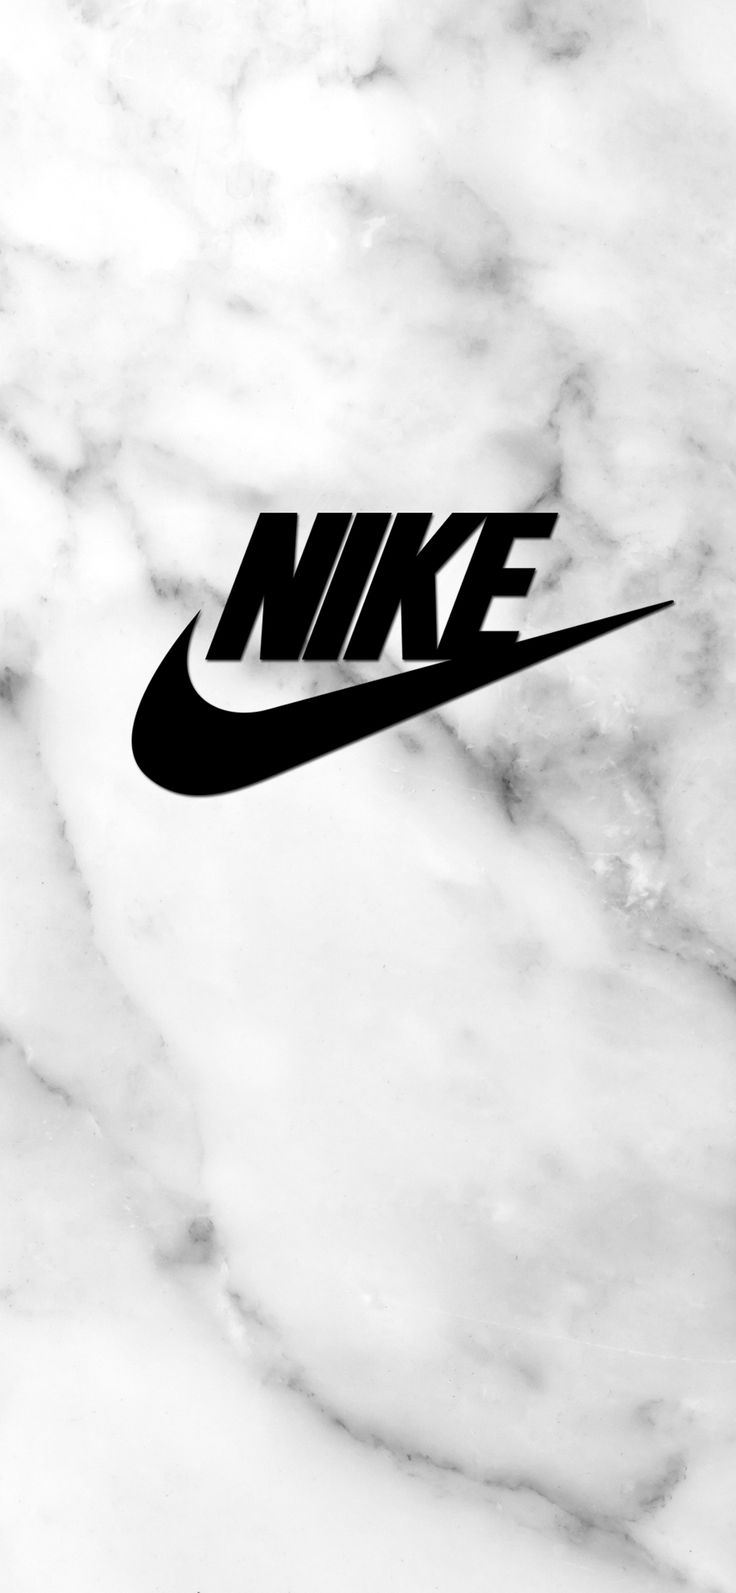 Nike iPhone X wallpaper. You can order iphone case with this picture. Just click on picture :). Nike wallpaper iphone, Nike wallpaper, Motorola wallpaper